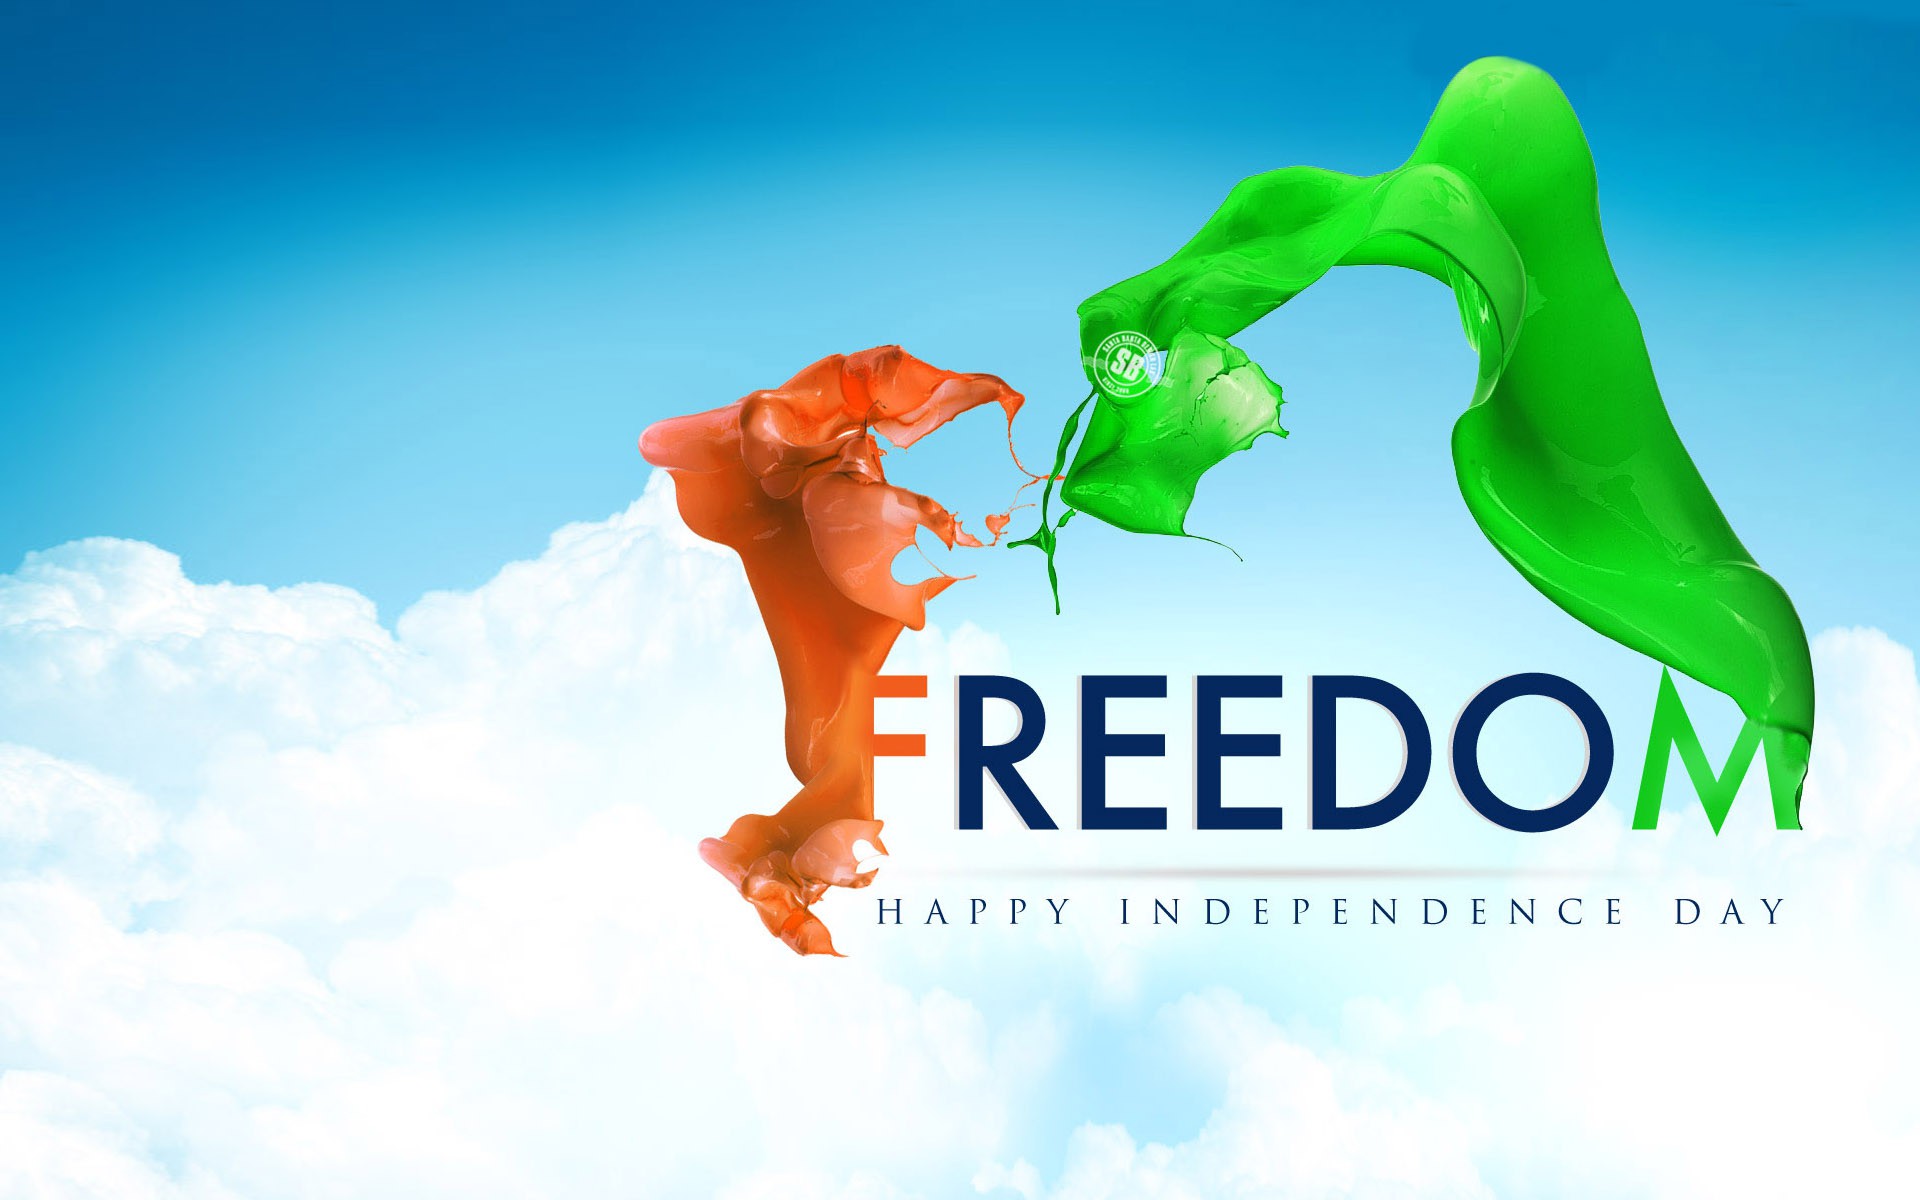 Freedom Independence Day Of India Free Awesome Image For Mobile